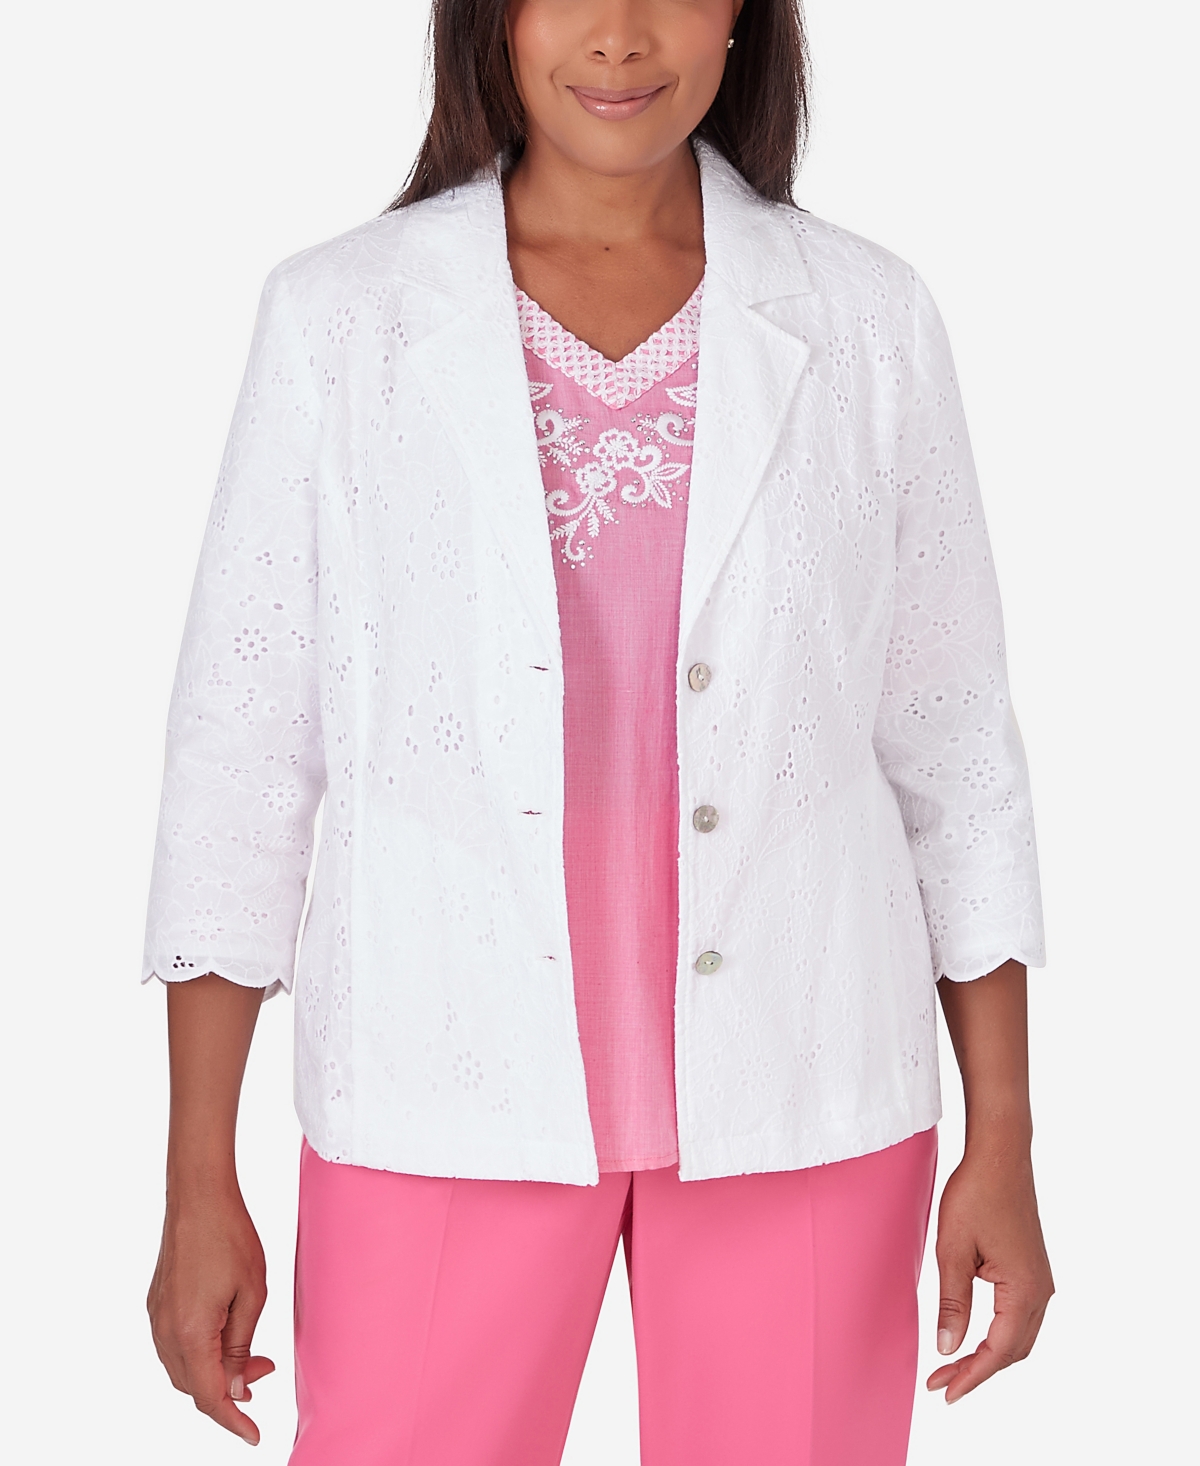 ALFRED DUNNER PETITE PARADISE ISLAND BUTTON FRONT EYELET BLAZER